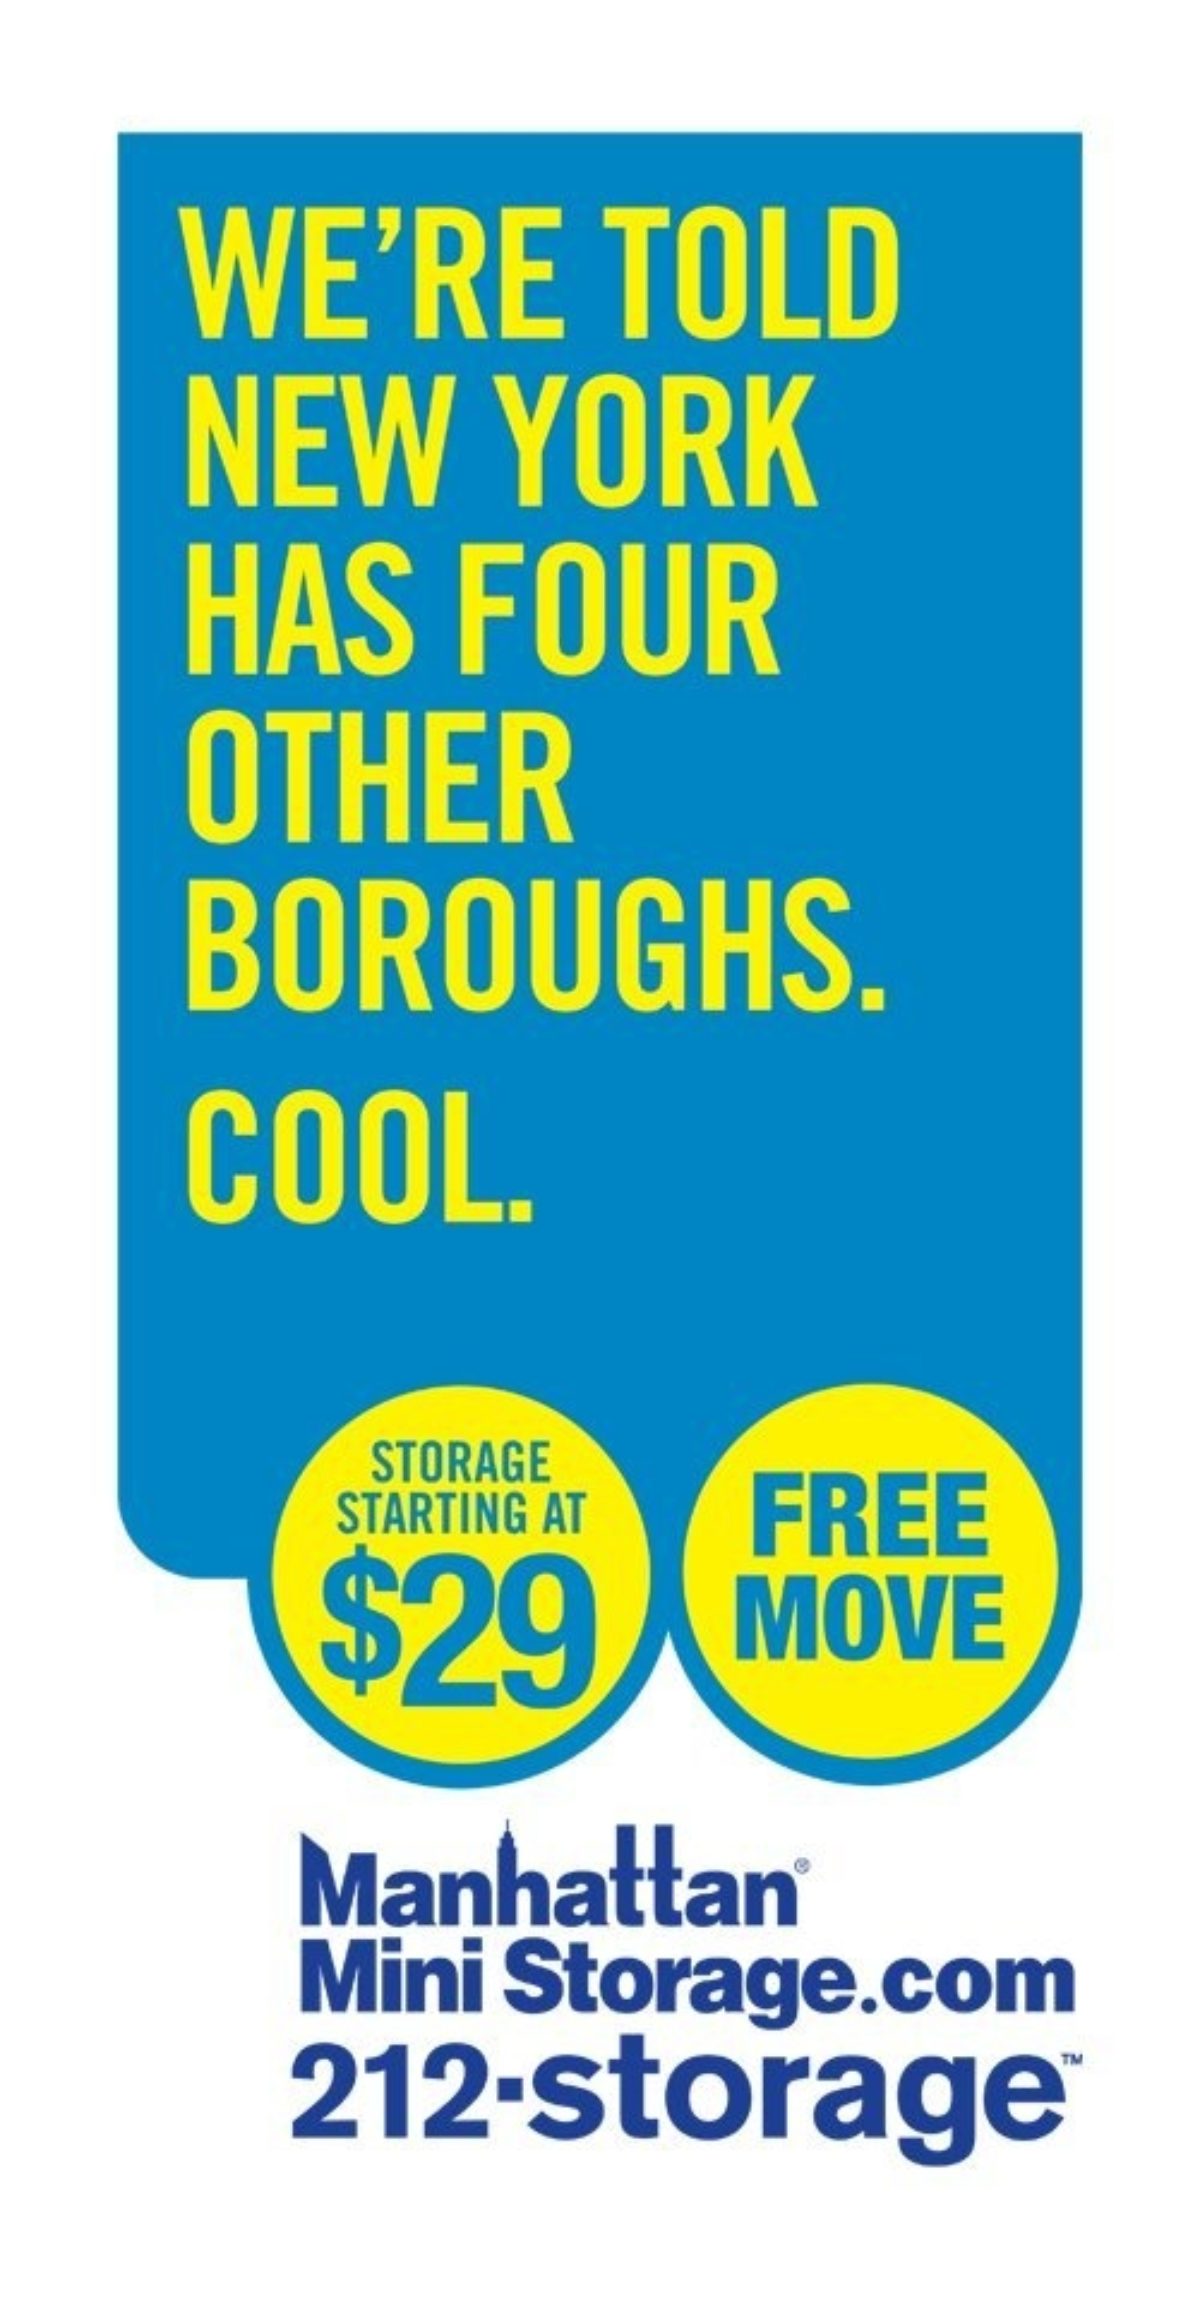 A blue poster with yellow text advertising Manhattan Mini Storage.